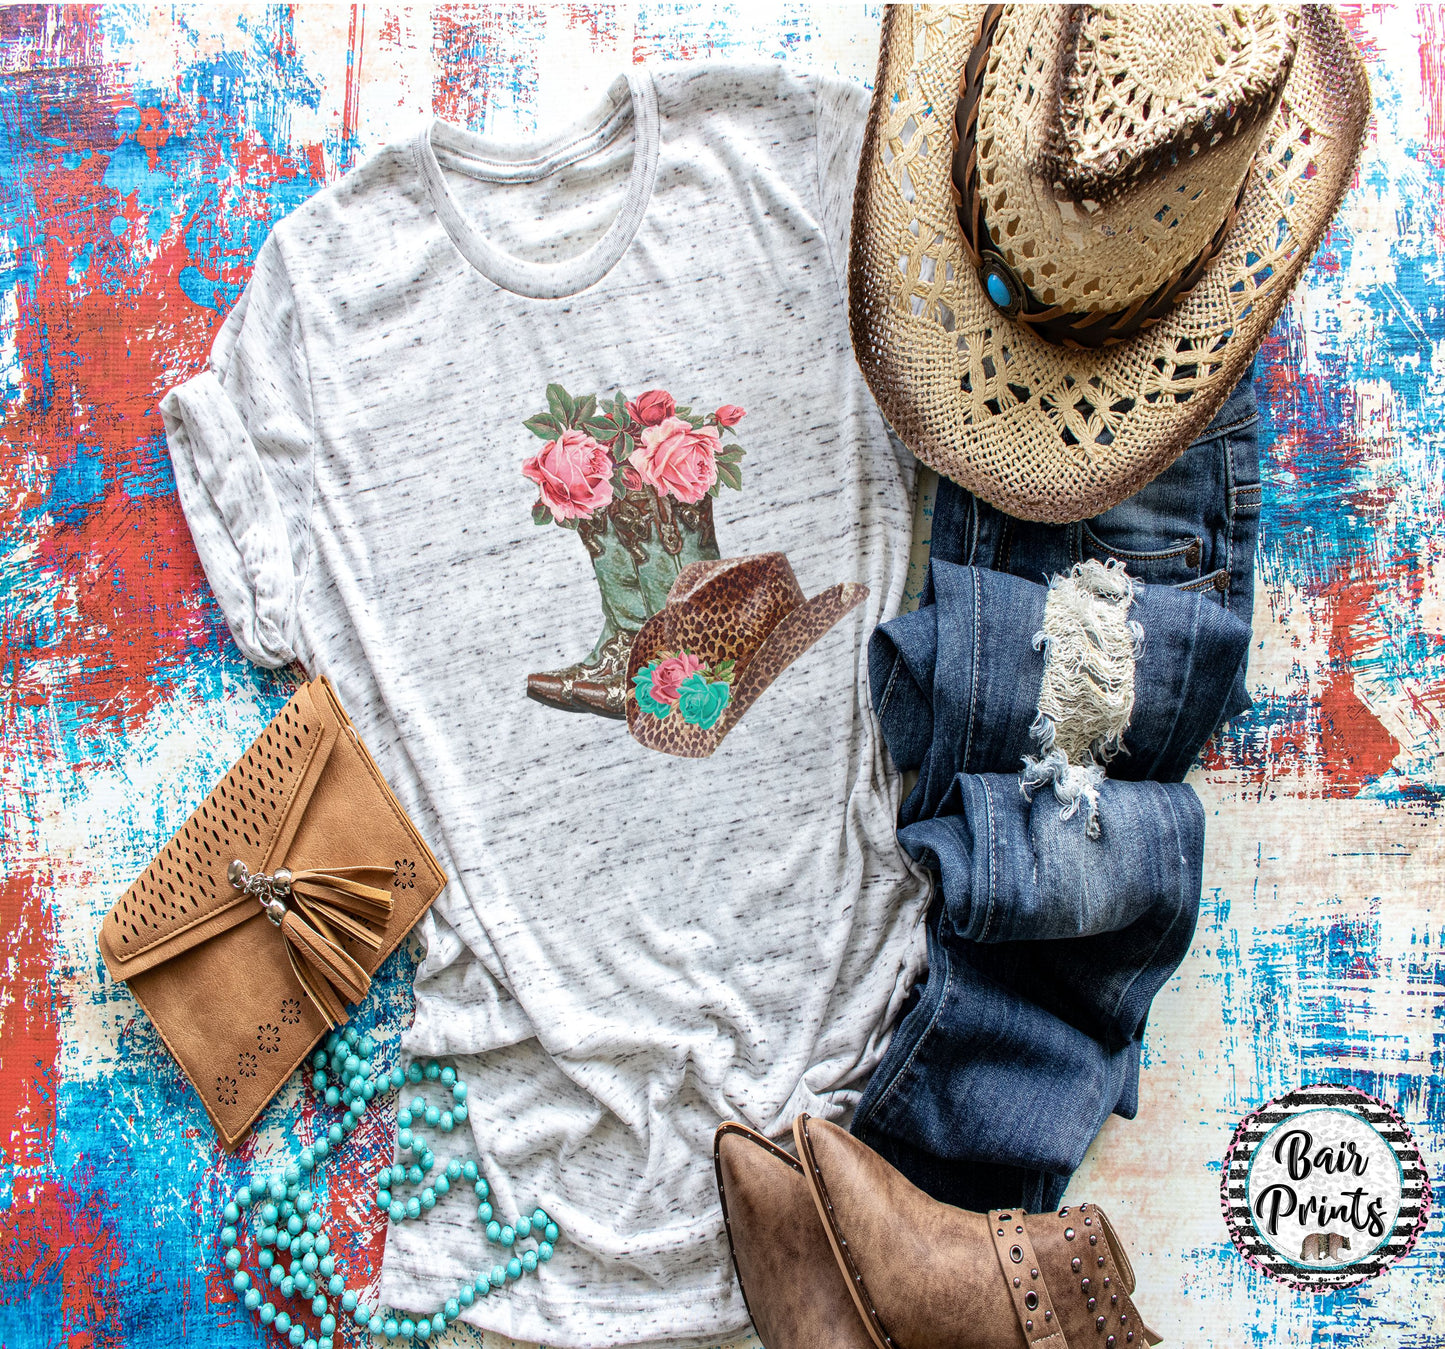 Boots and Hat Graphic Tee. - Bair Prints